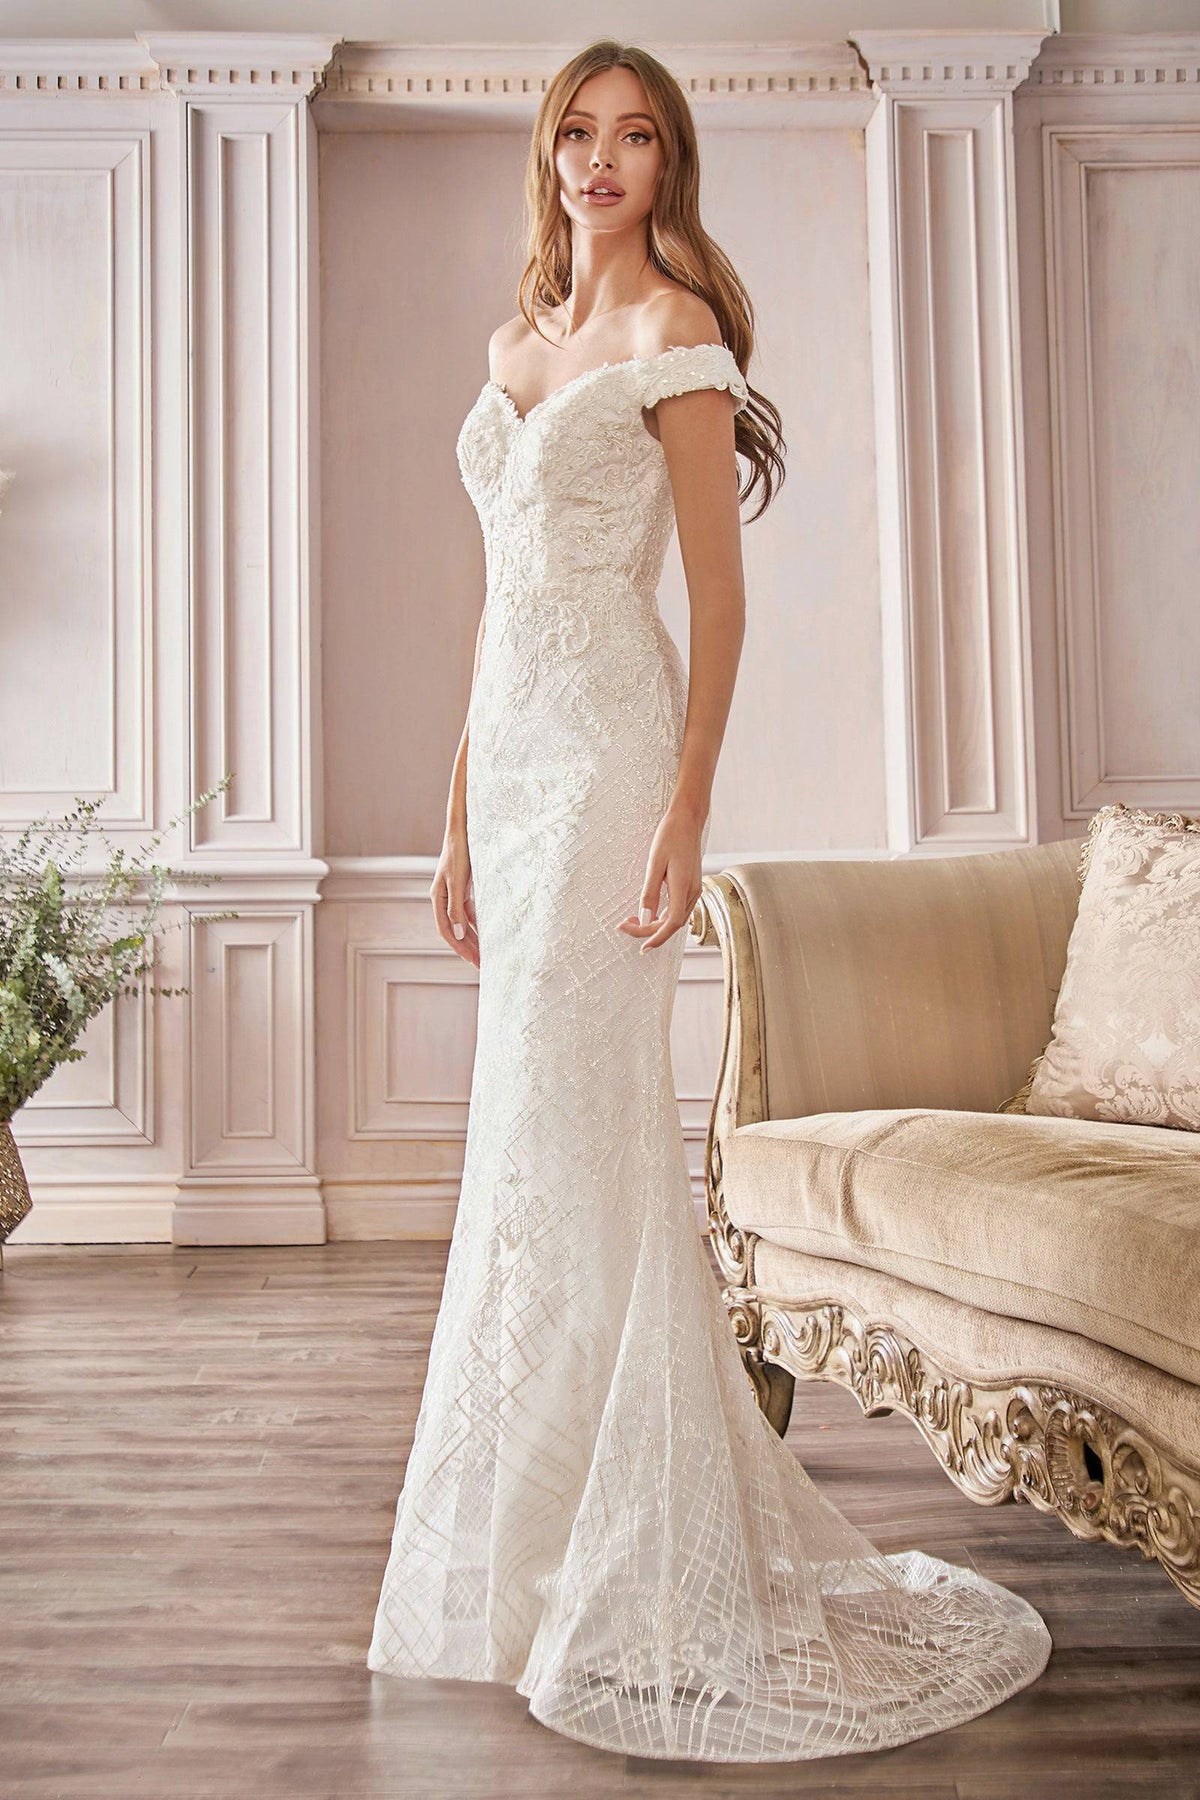 Opulent Wedding Gown with Embroidered Bodice and Mini Train #CDCD929 - NORMA REED